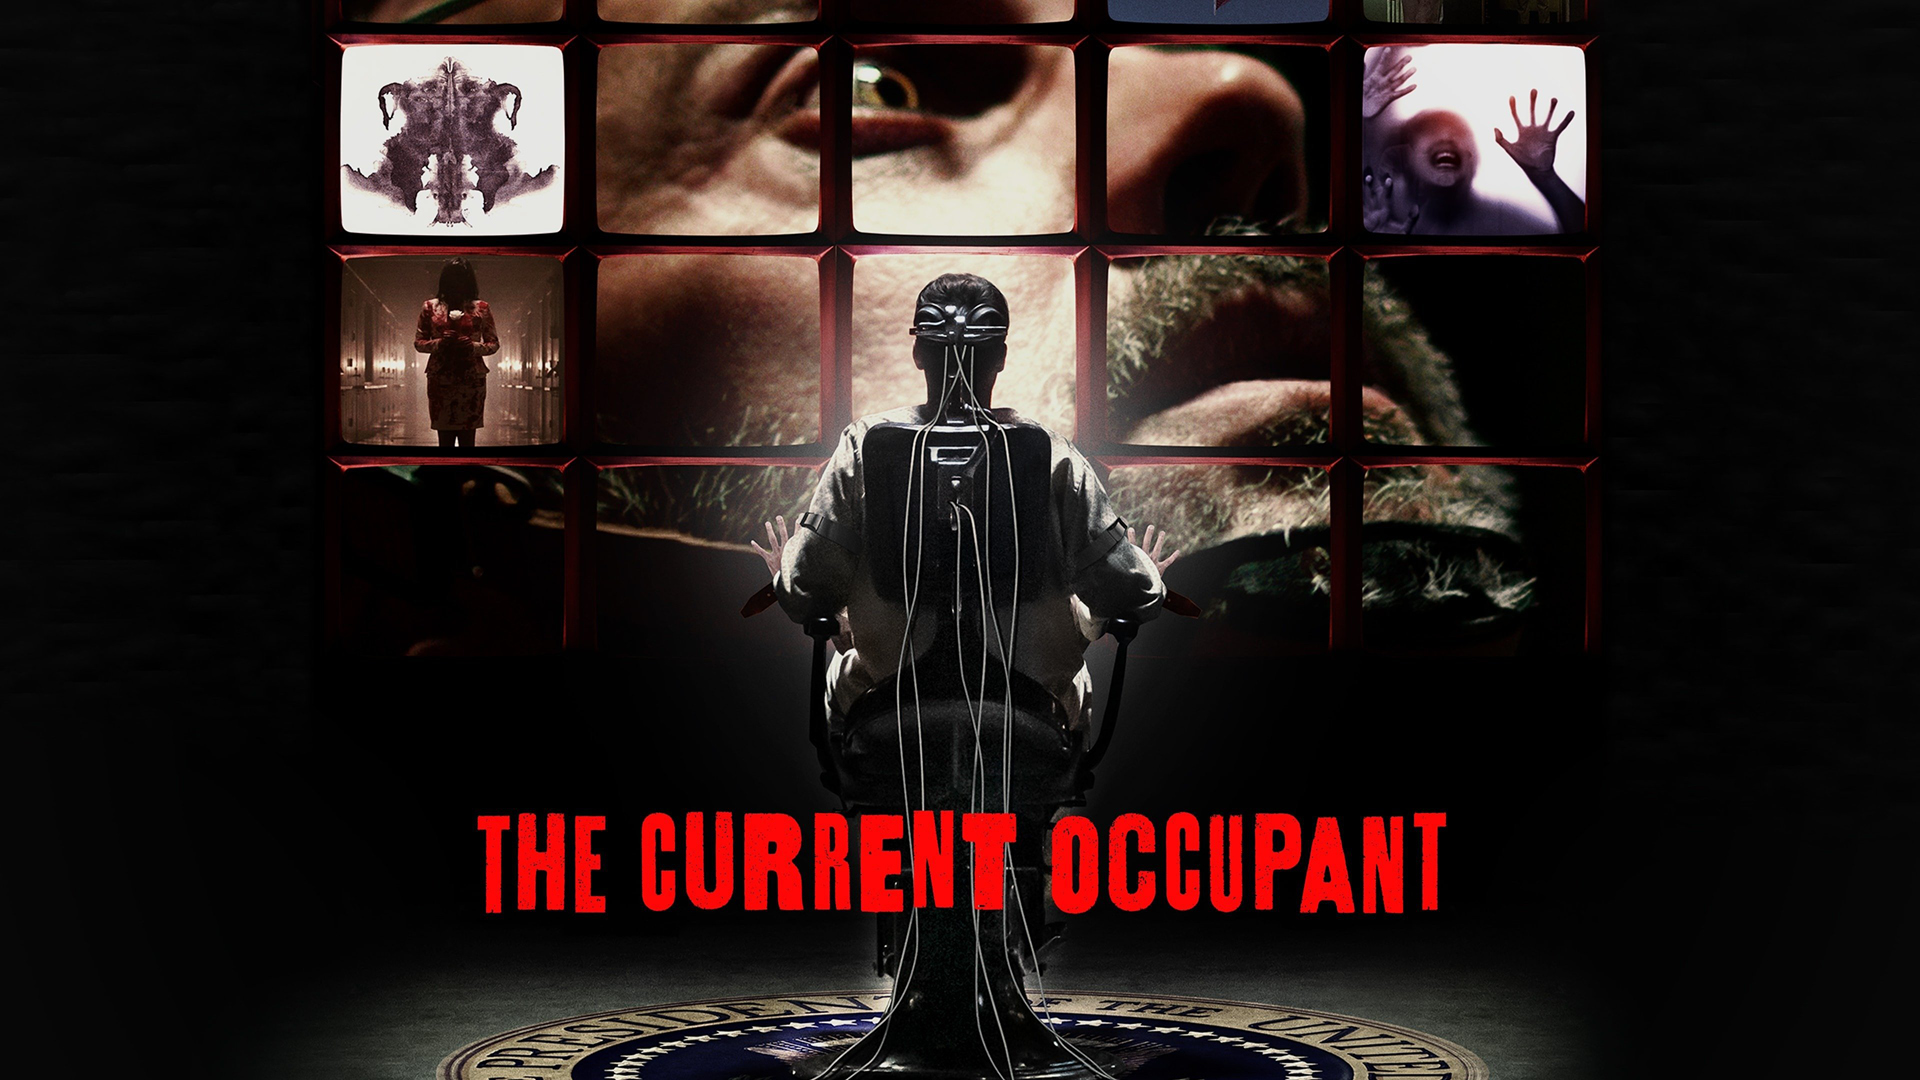 Into The Dark: The Current Occupant